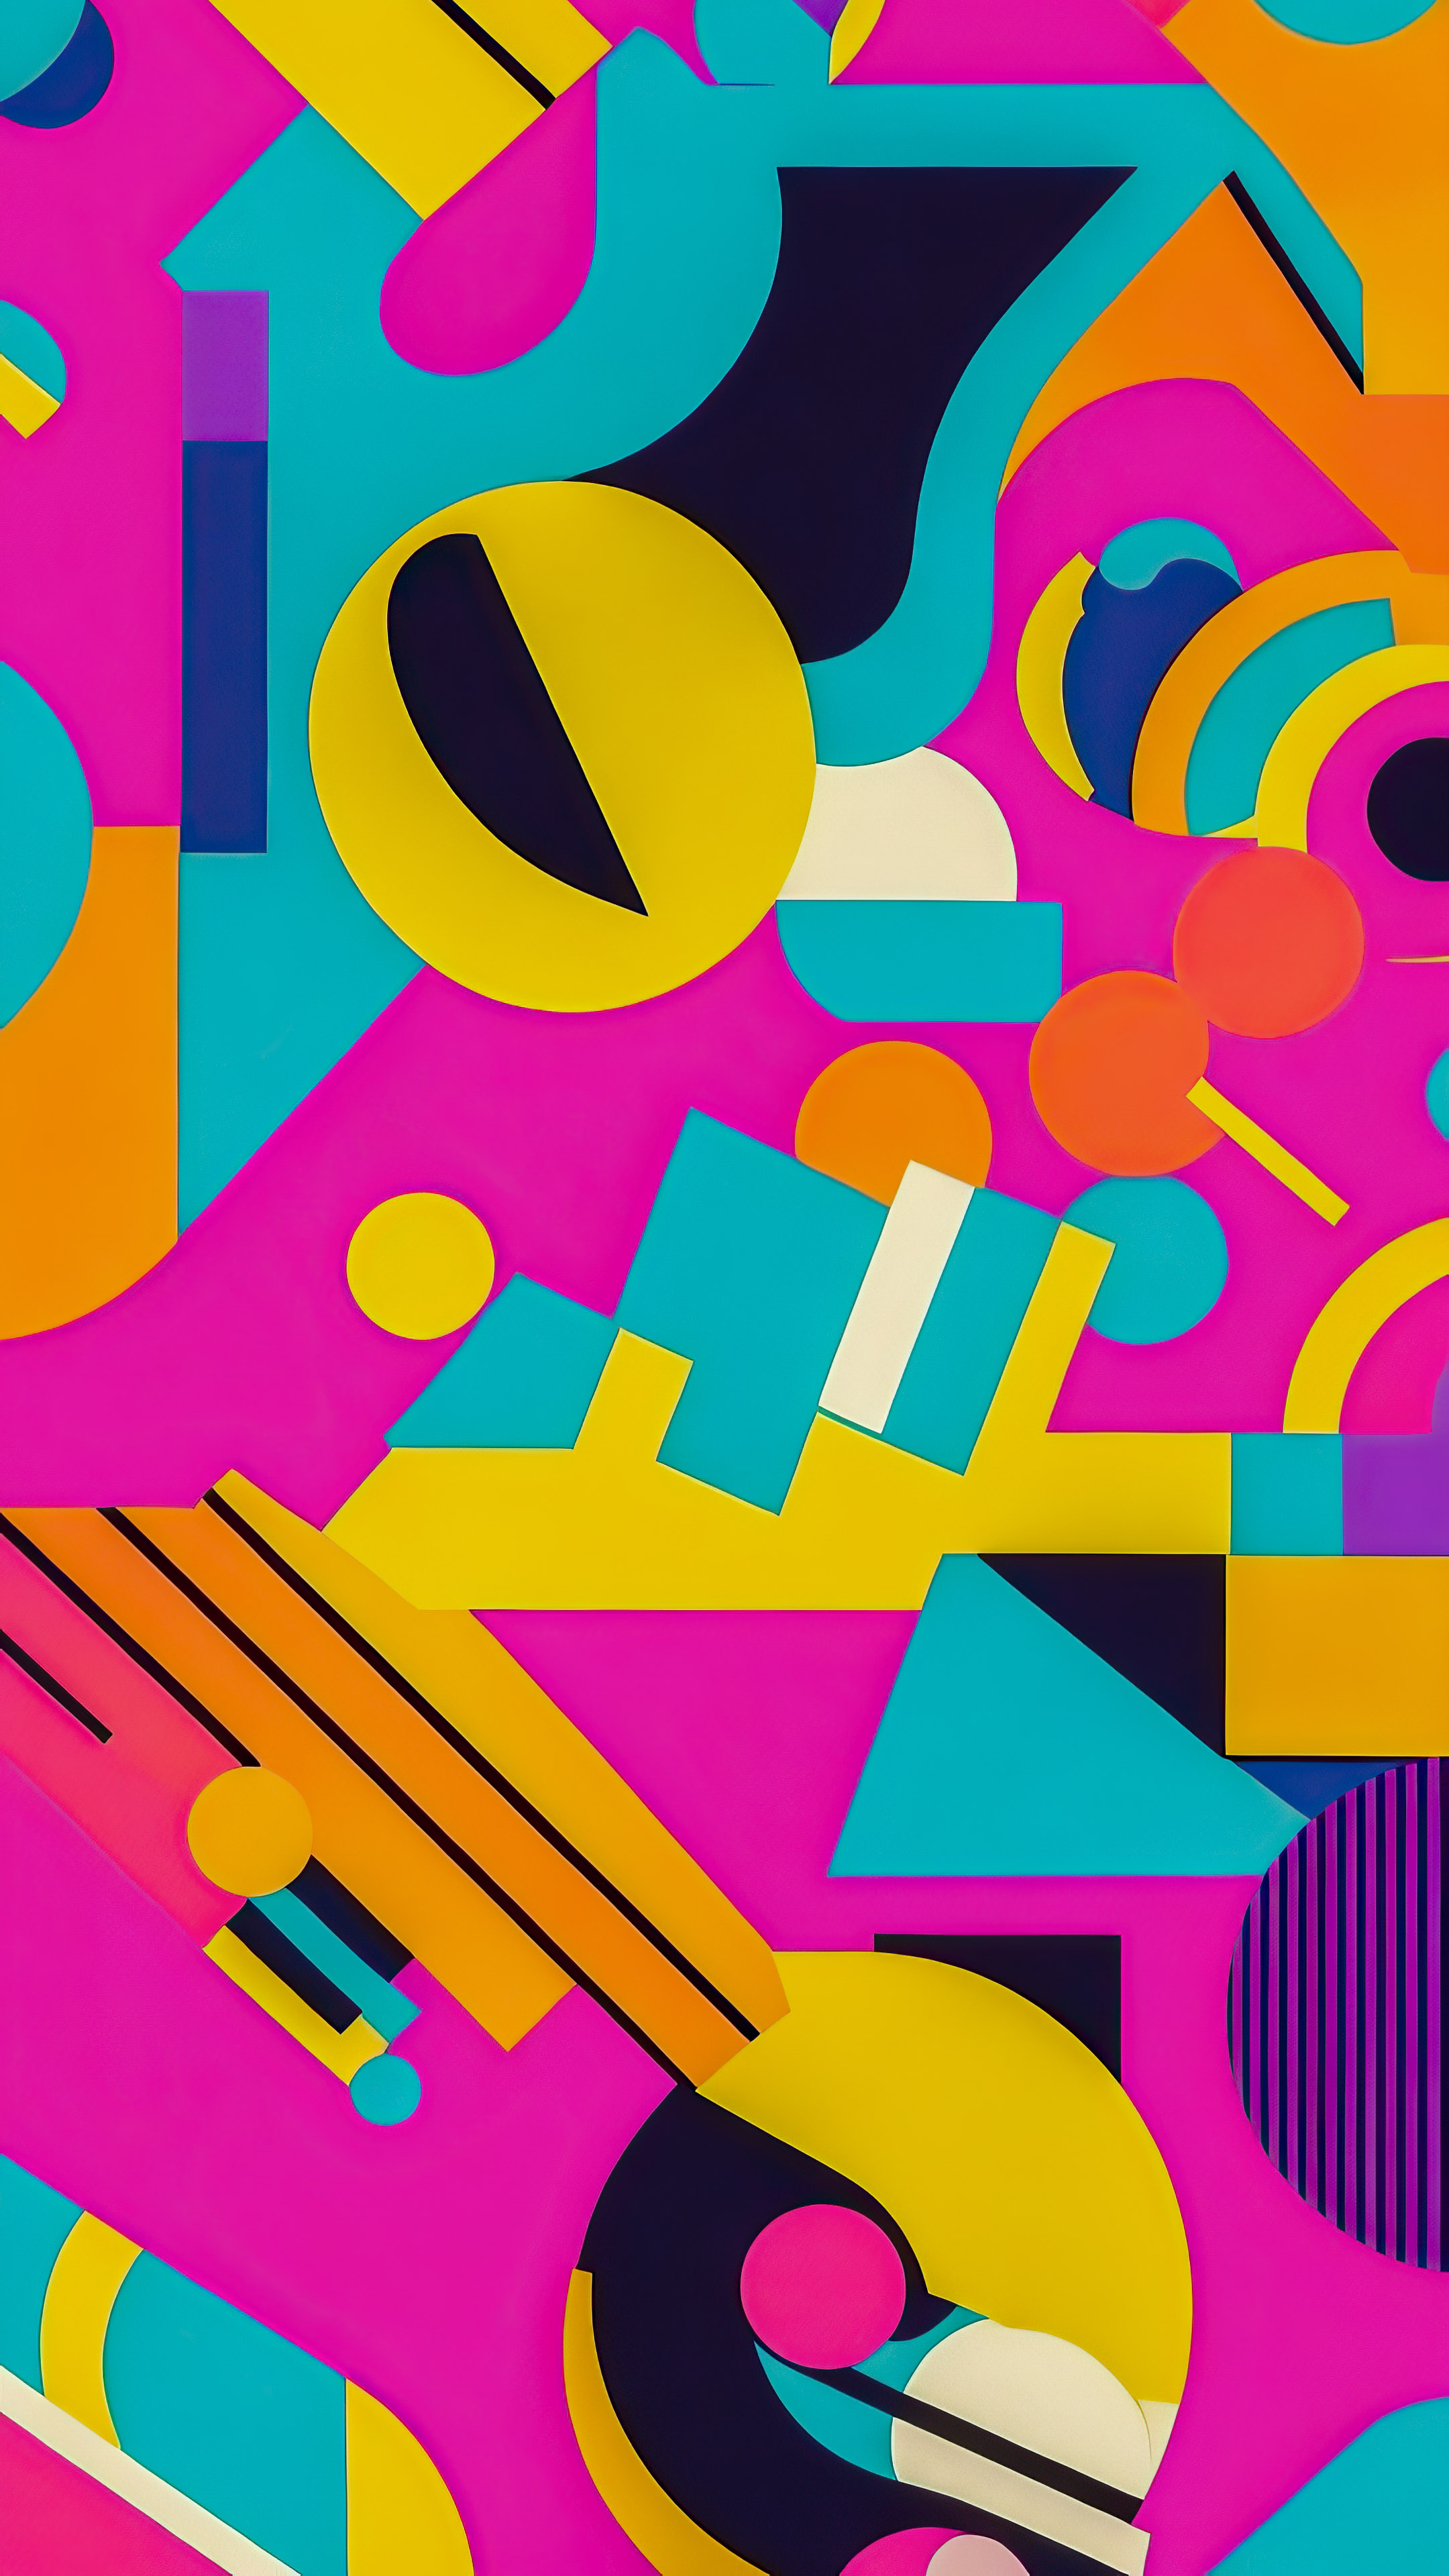 Elevate your iPhone's aesthetic with pop art colors in our pure abstract iPhone wallpaper.